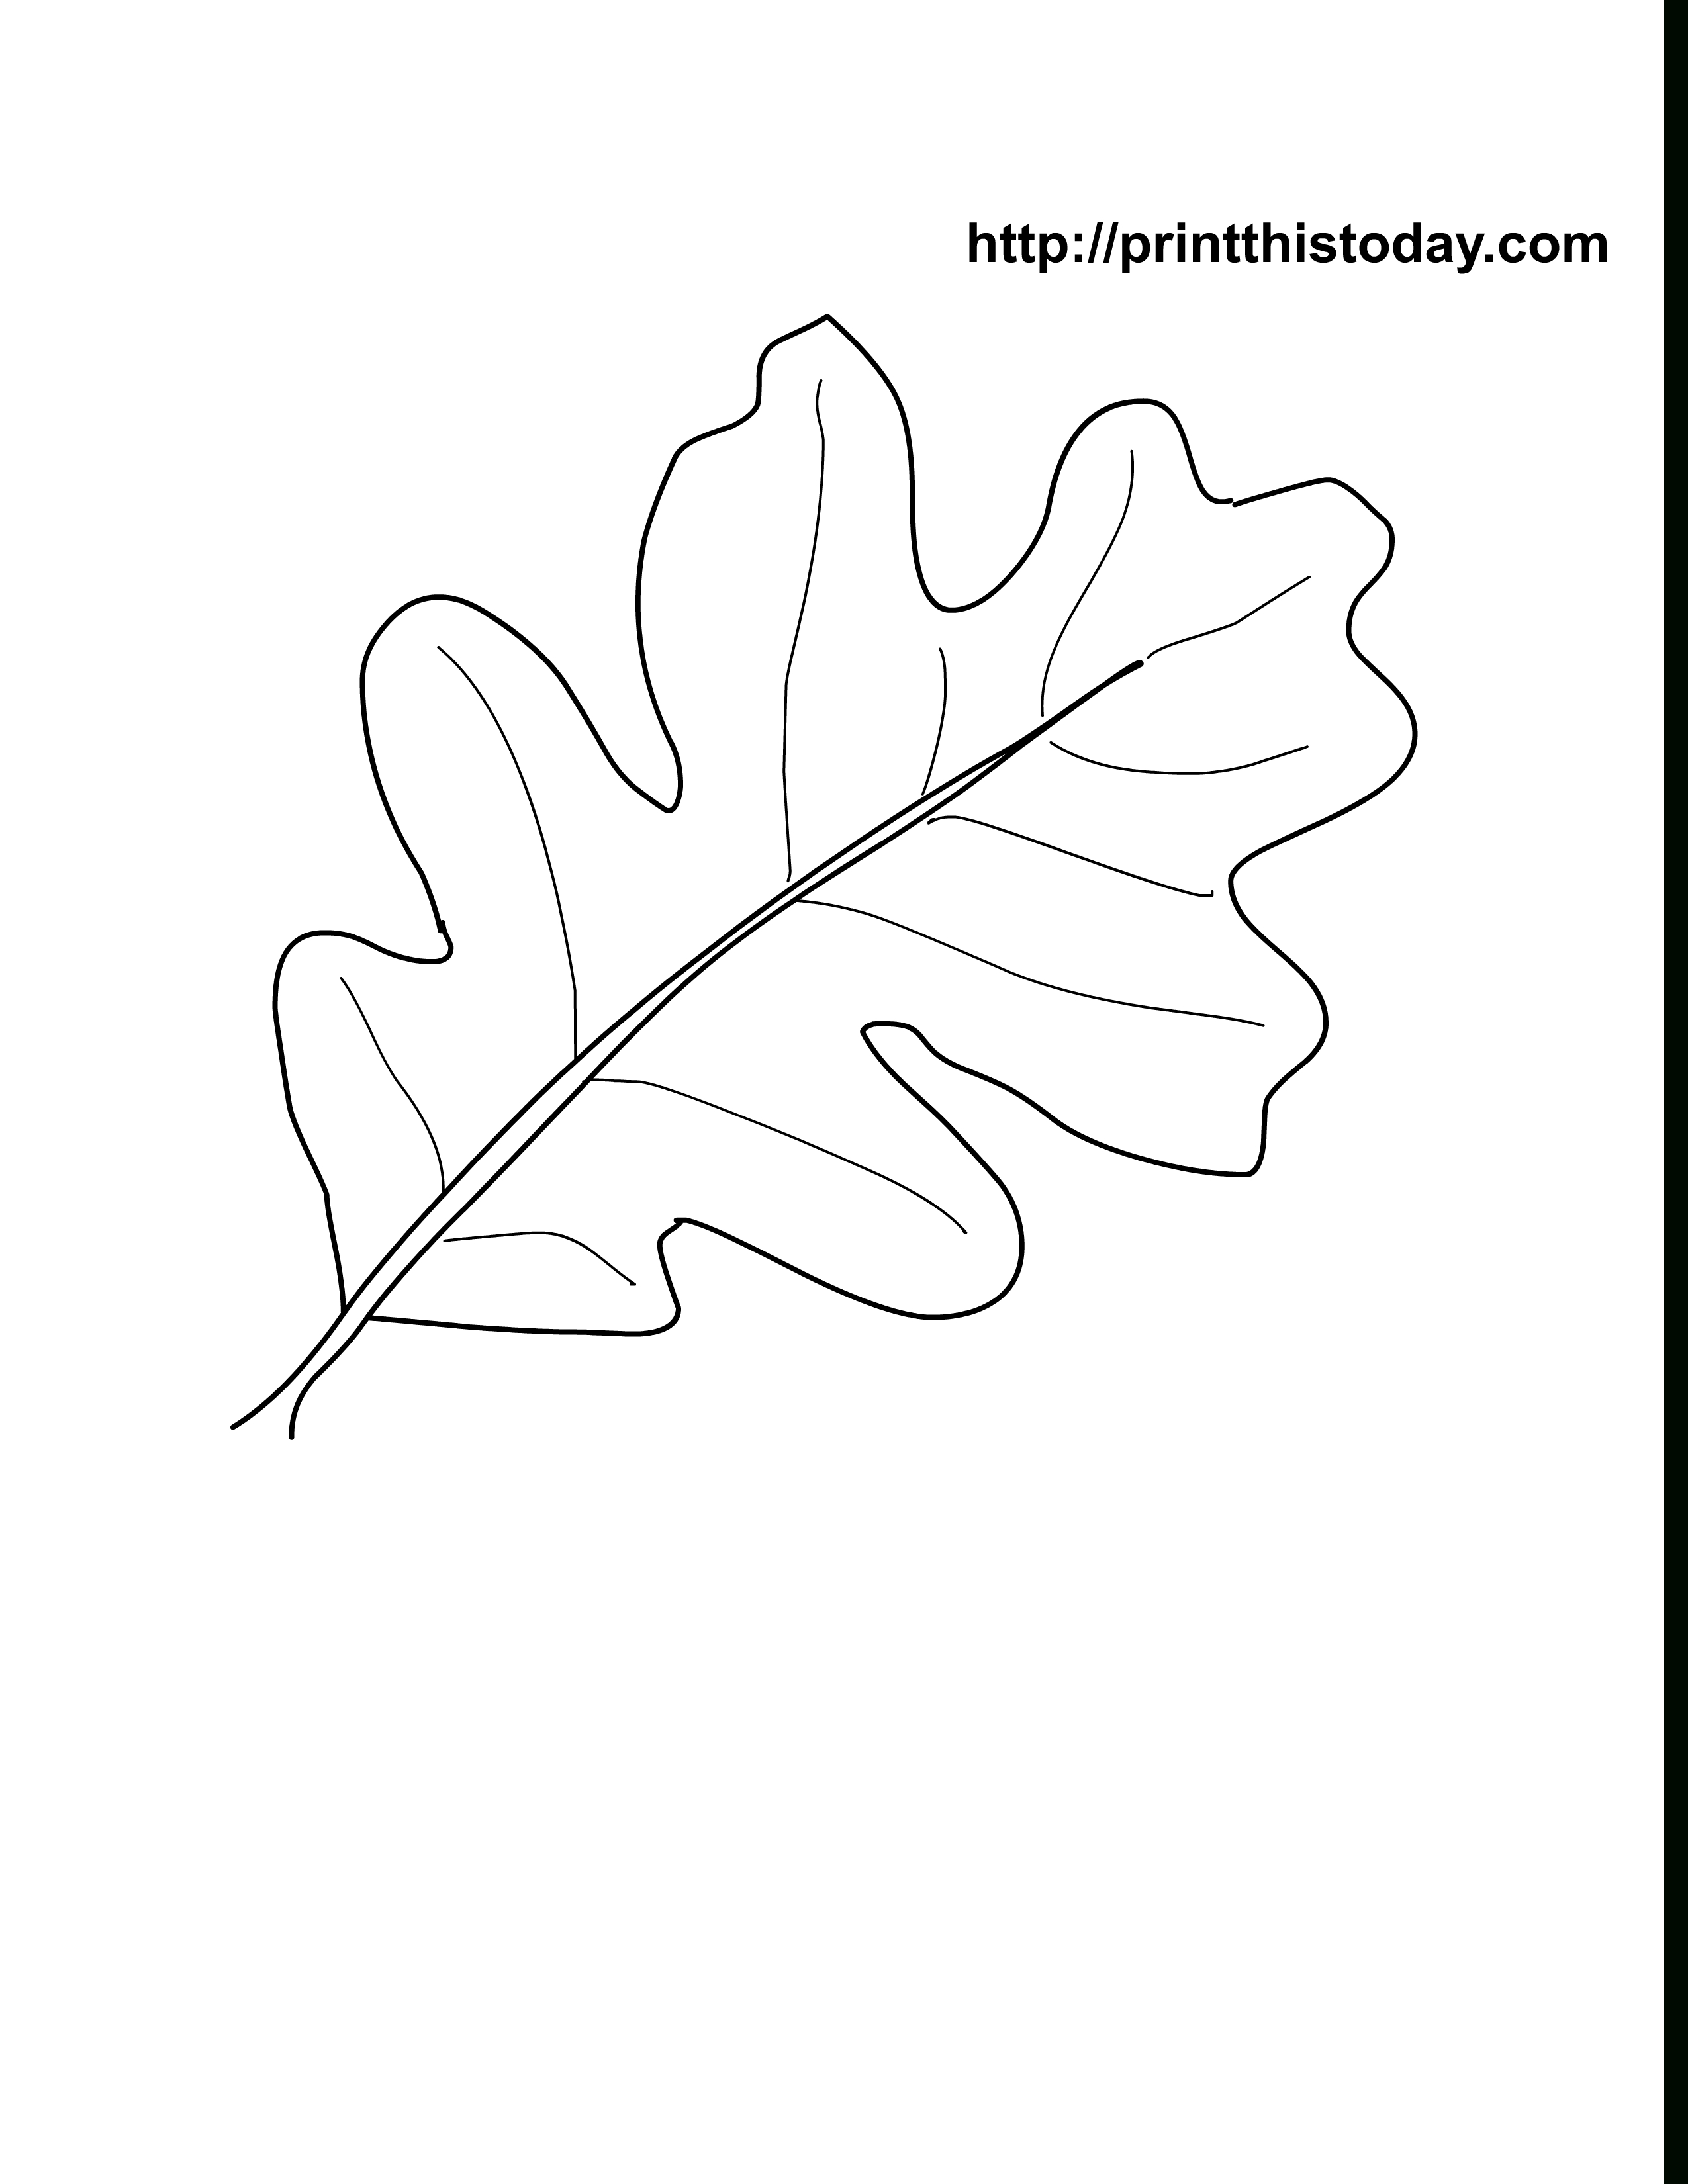 Oak Leaves Coloring Pages Printable | Craft Ideas | Pinterest - Free Printable Leaves